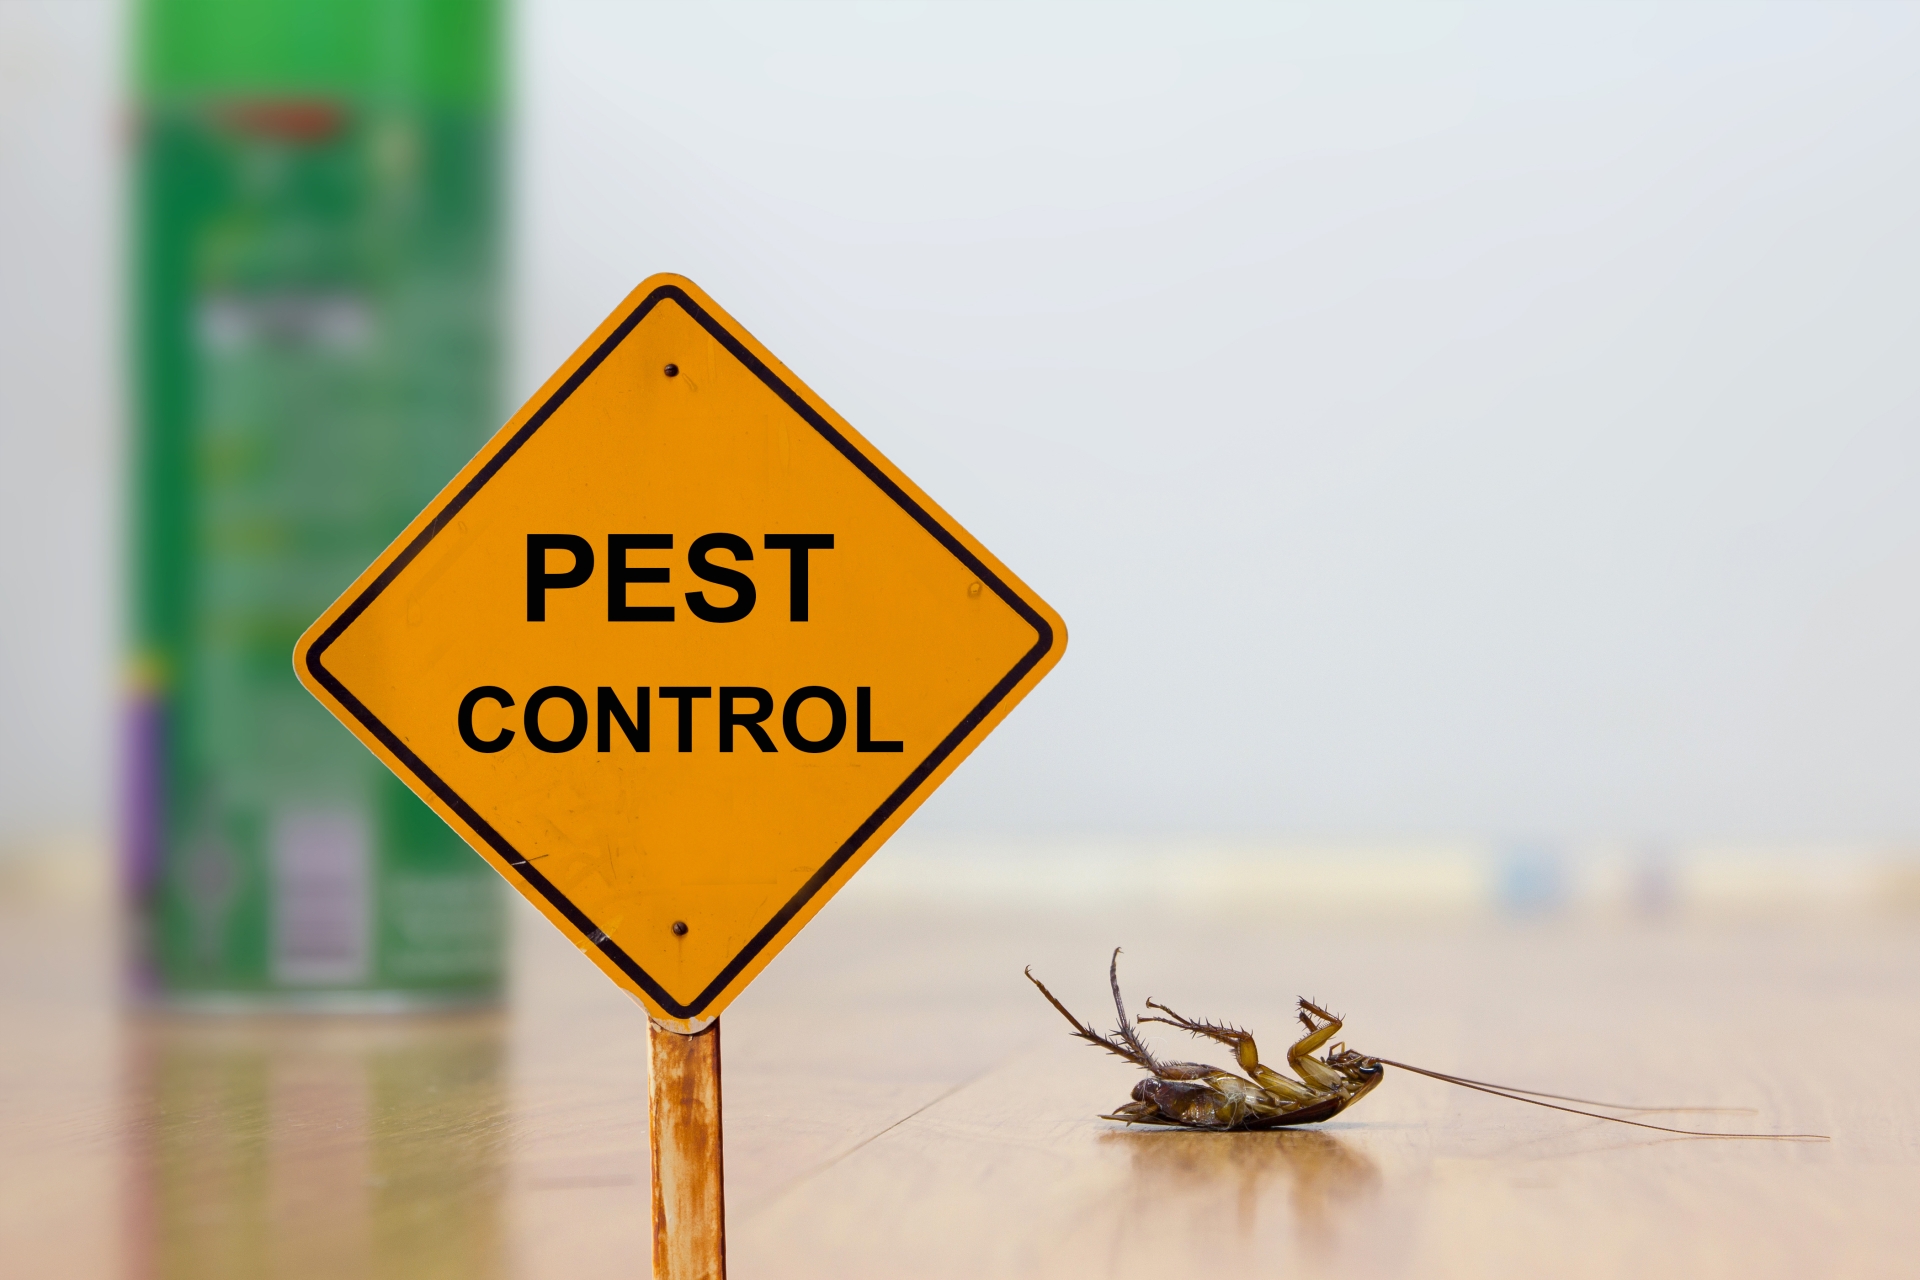 24 Hour Pest Control, Pest Control in Molesey, East Molesey, West Molesey, KT8. Call Now 020 8166 9746